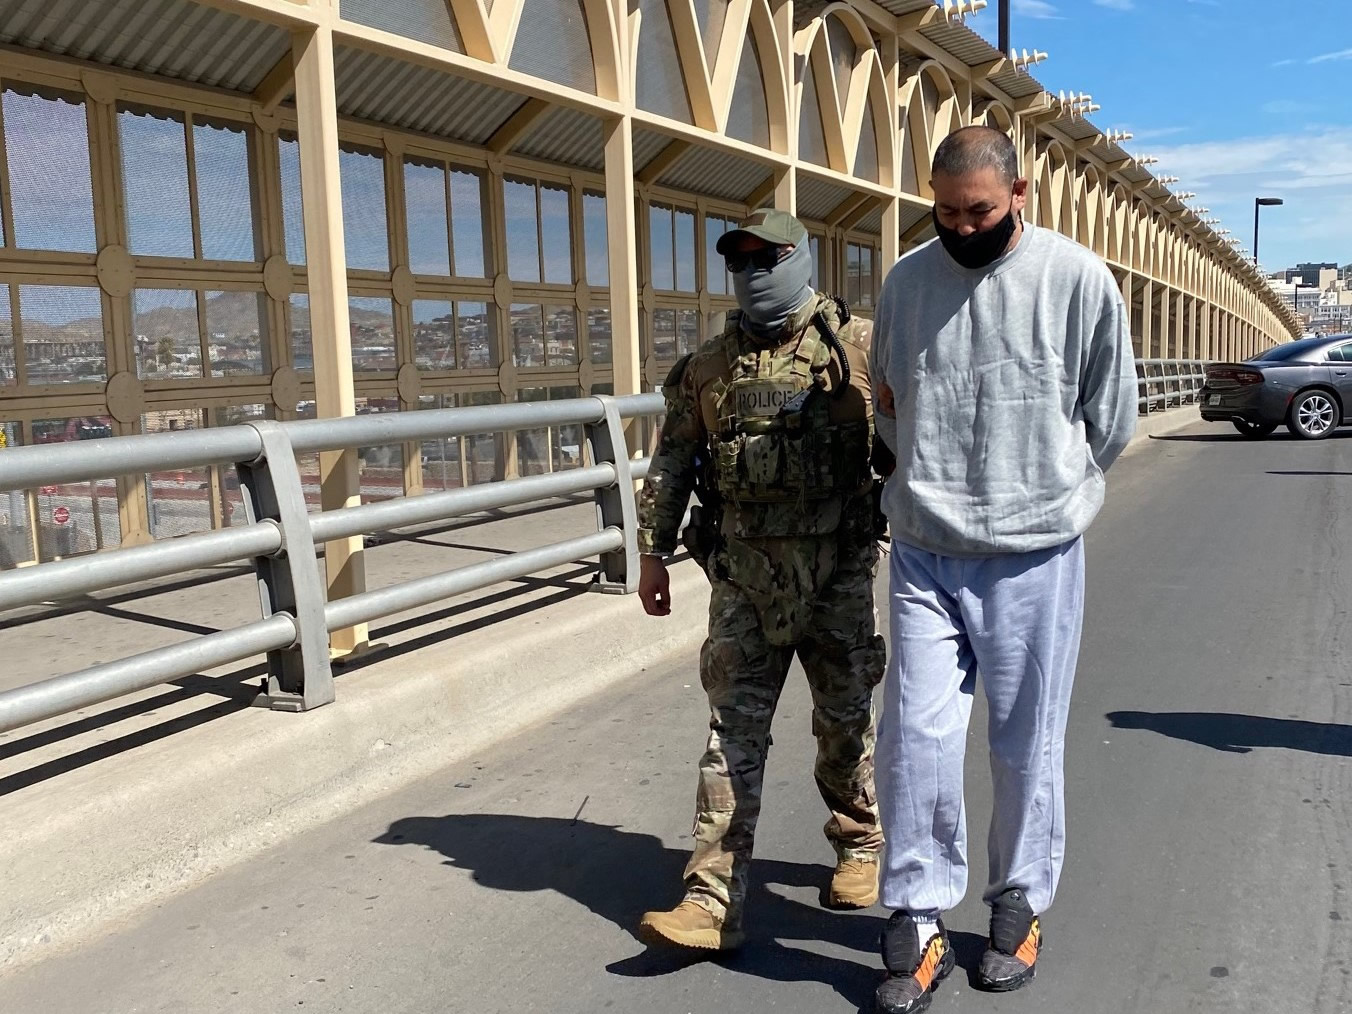 Martin Daniel Castillo-Rascon, 52, was removed from the United States to Mexico at the international boundary on top of the Stanton Street Bridge, where Mexican authorities took him into custody.